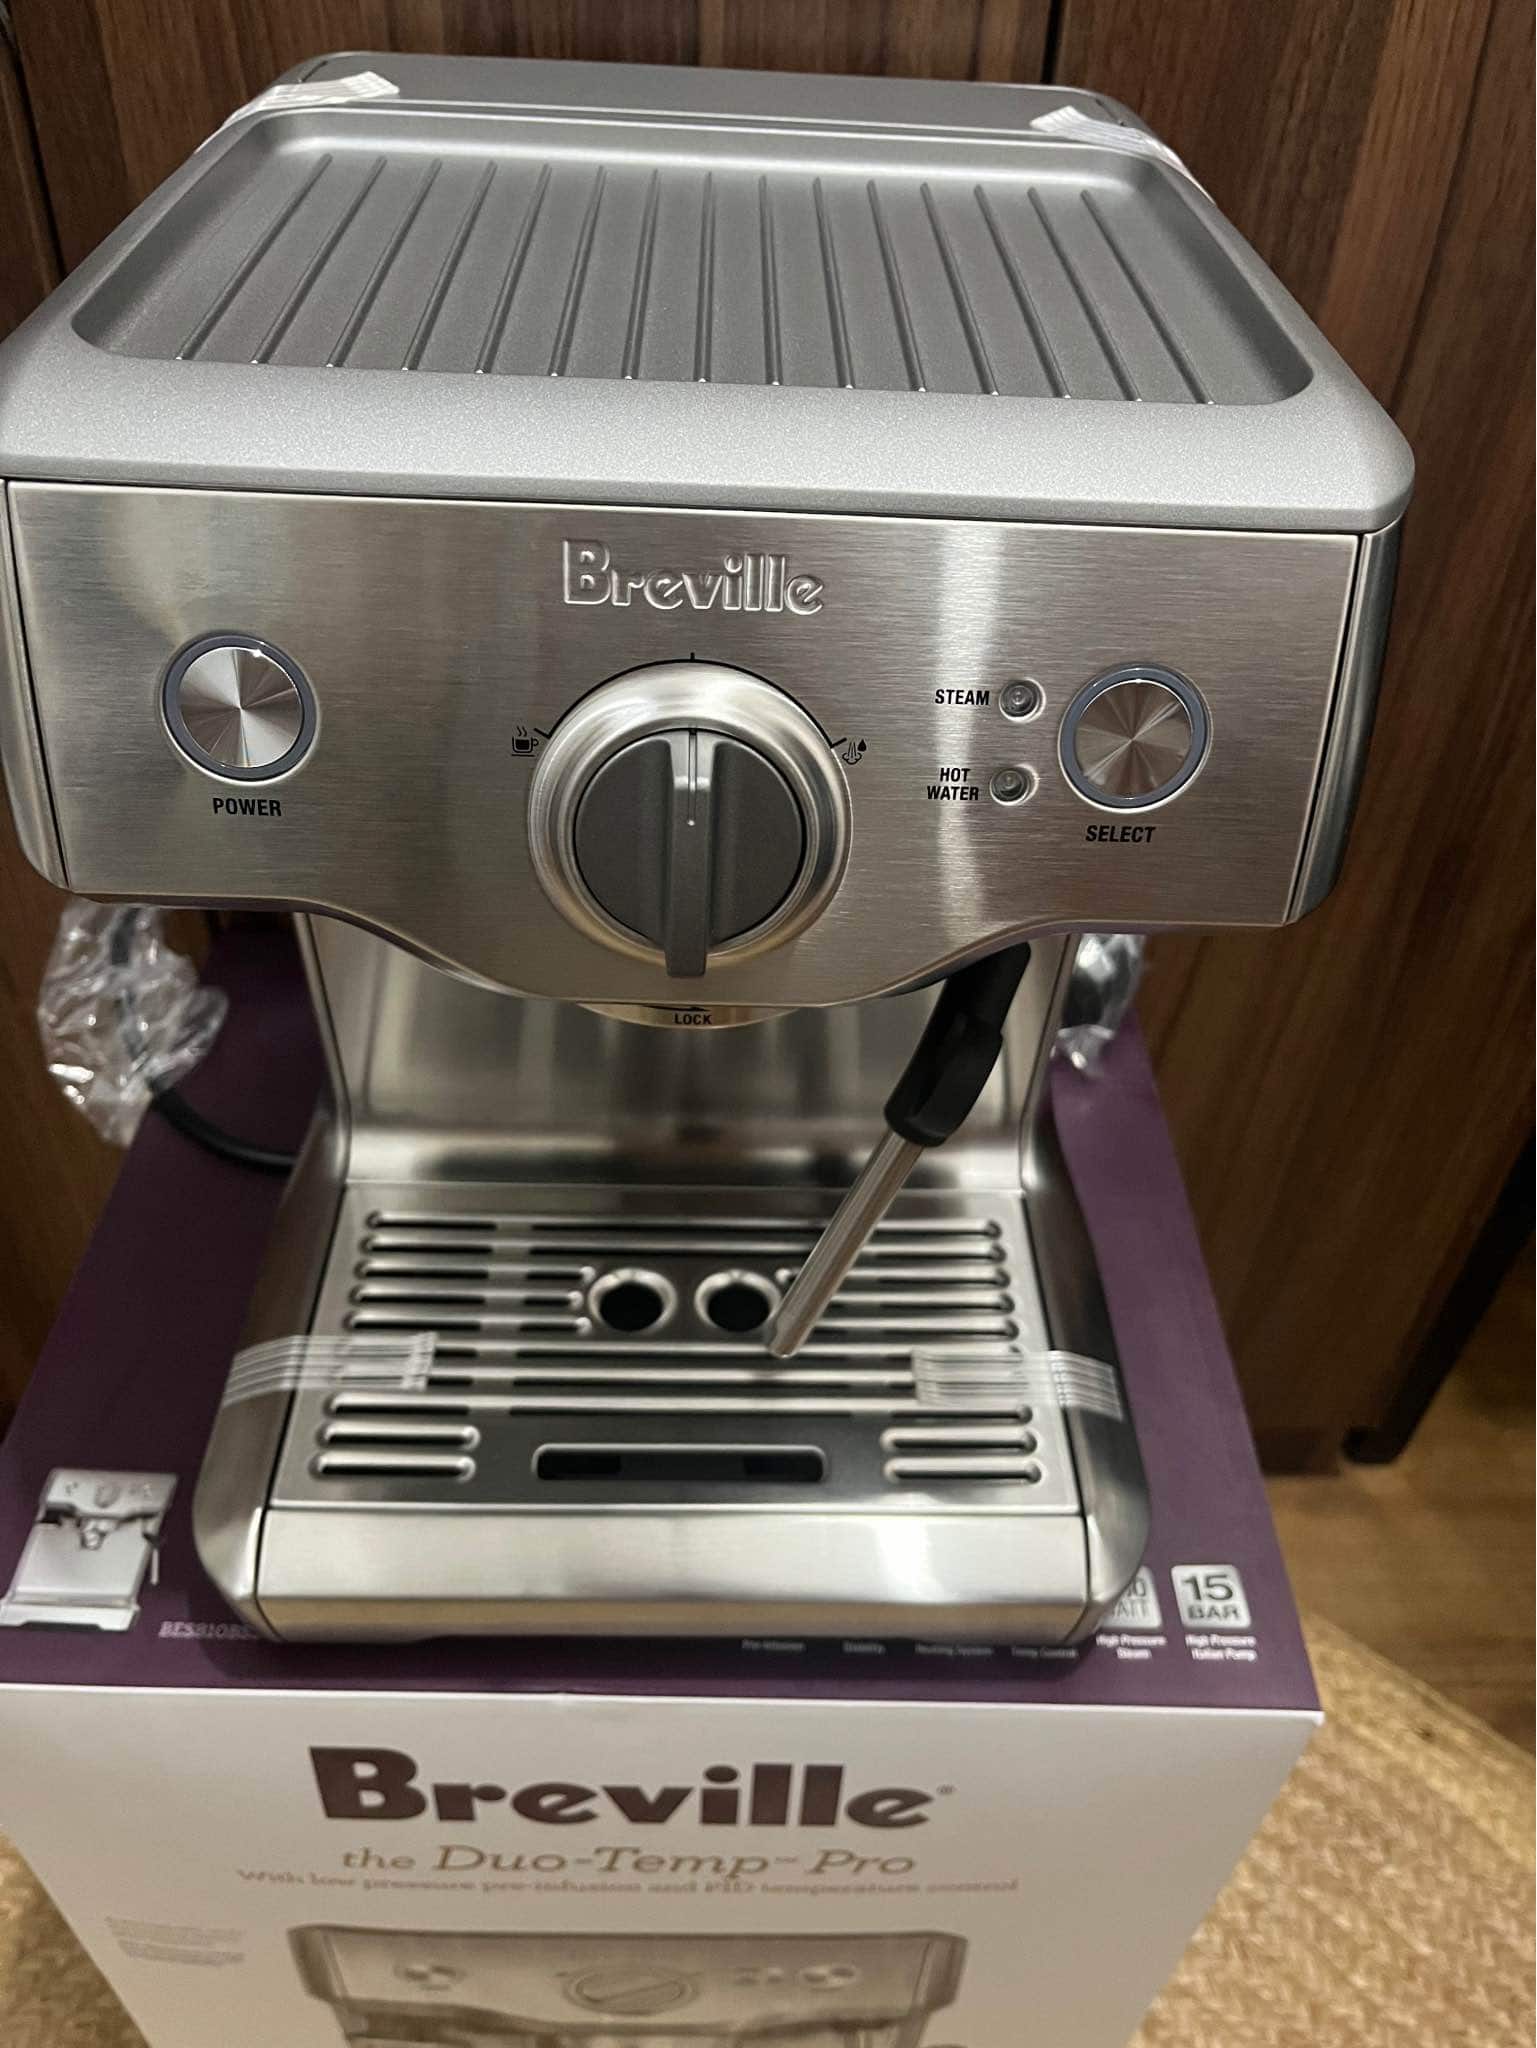 The Breville Duo Temp Pro is capable of brewing rich, aromatic espresso with a superior crema 